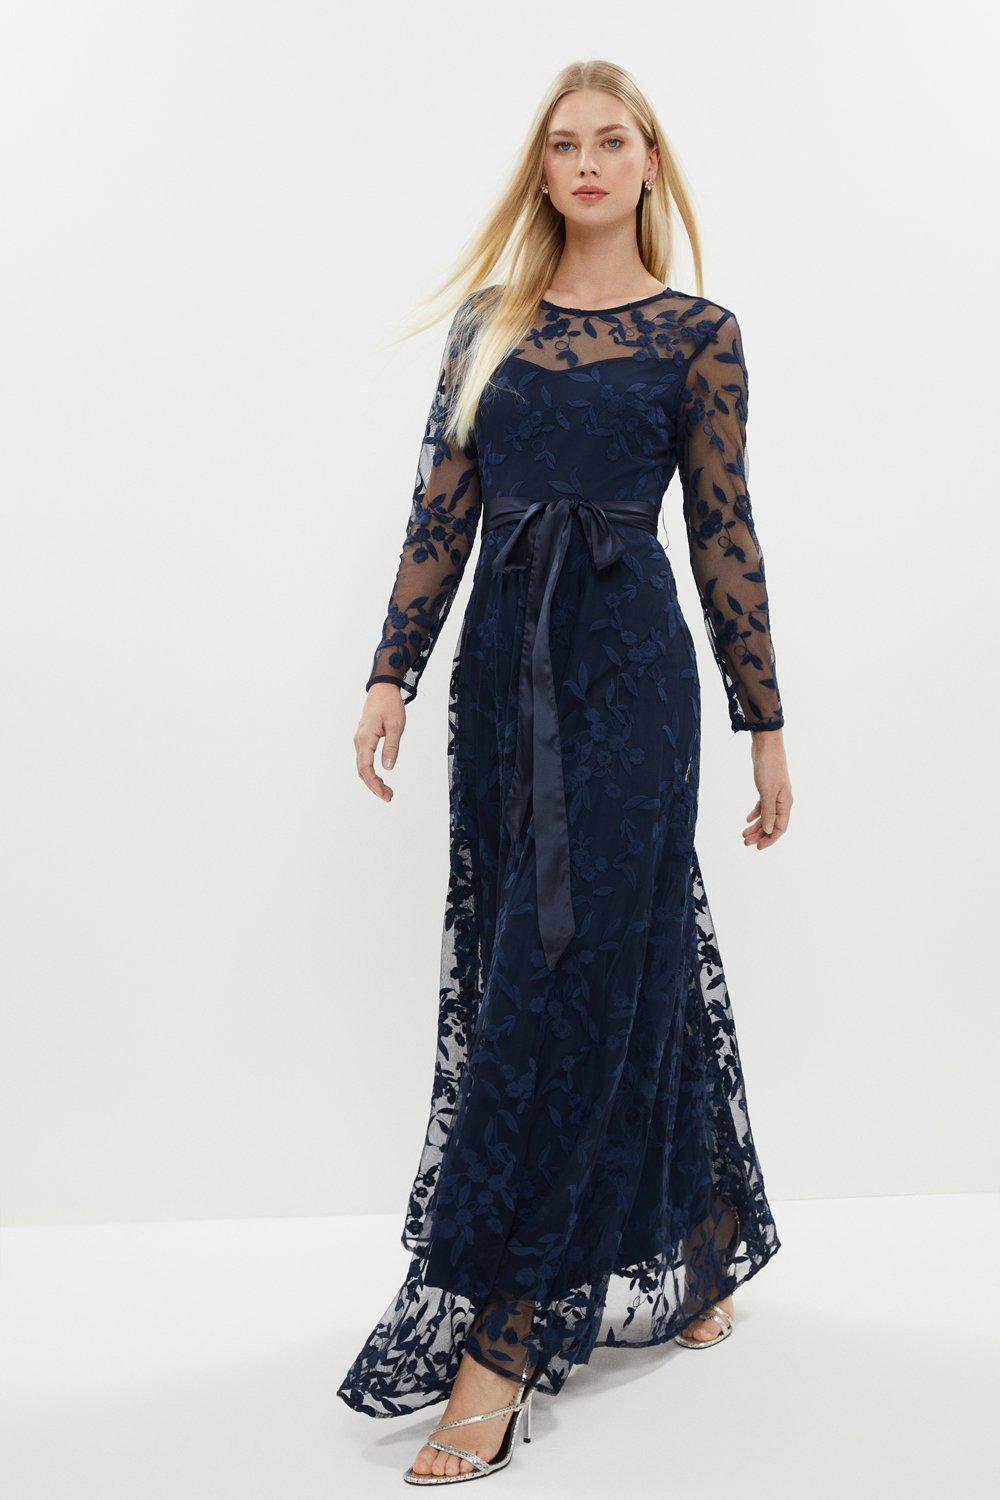 All Over Embroidered Long Sleeve Maxi Dress - Navy